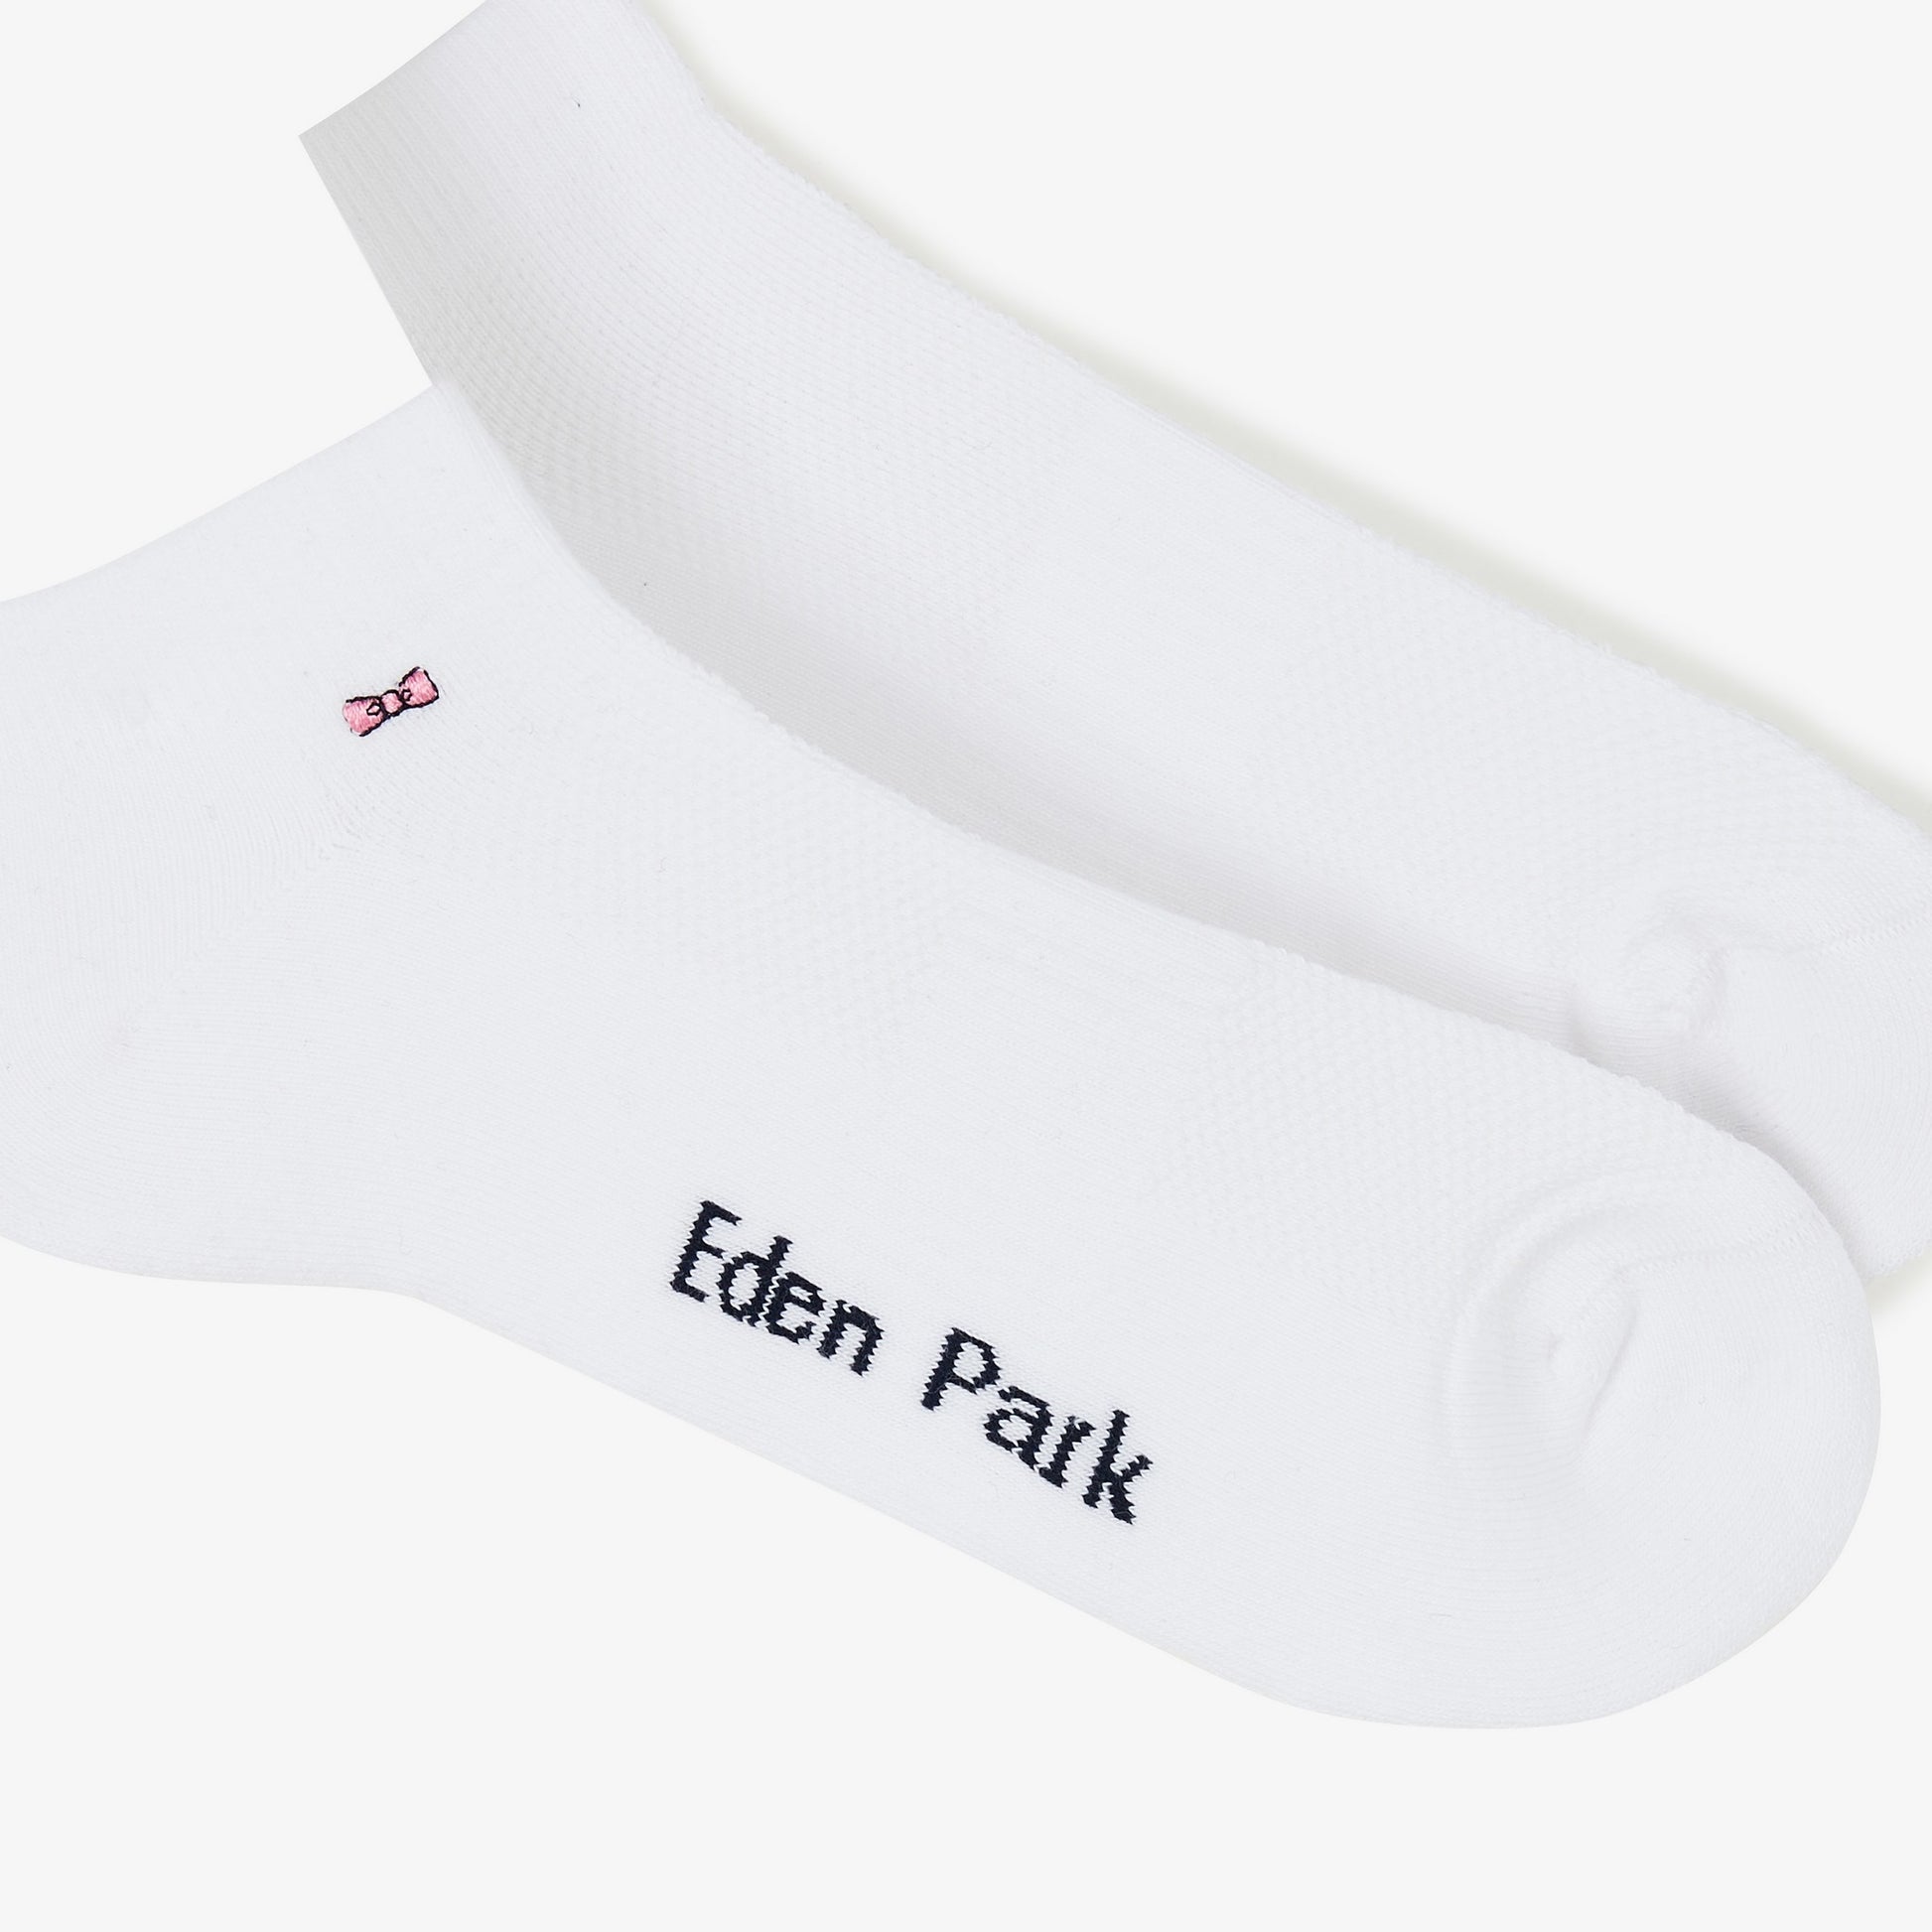 SKU Chaussettes Sport Basses Blanches